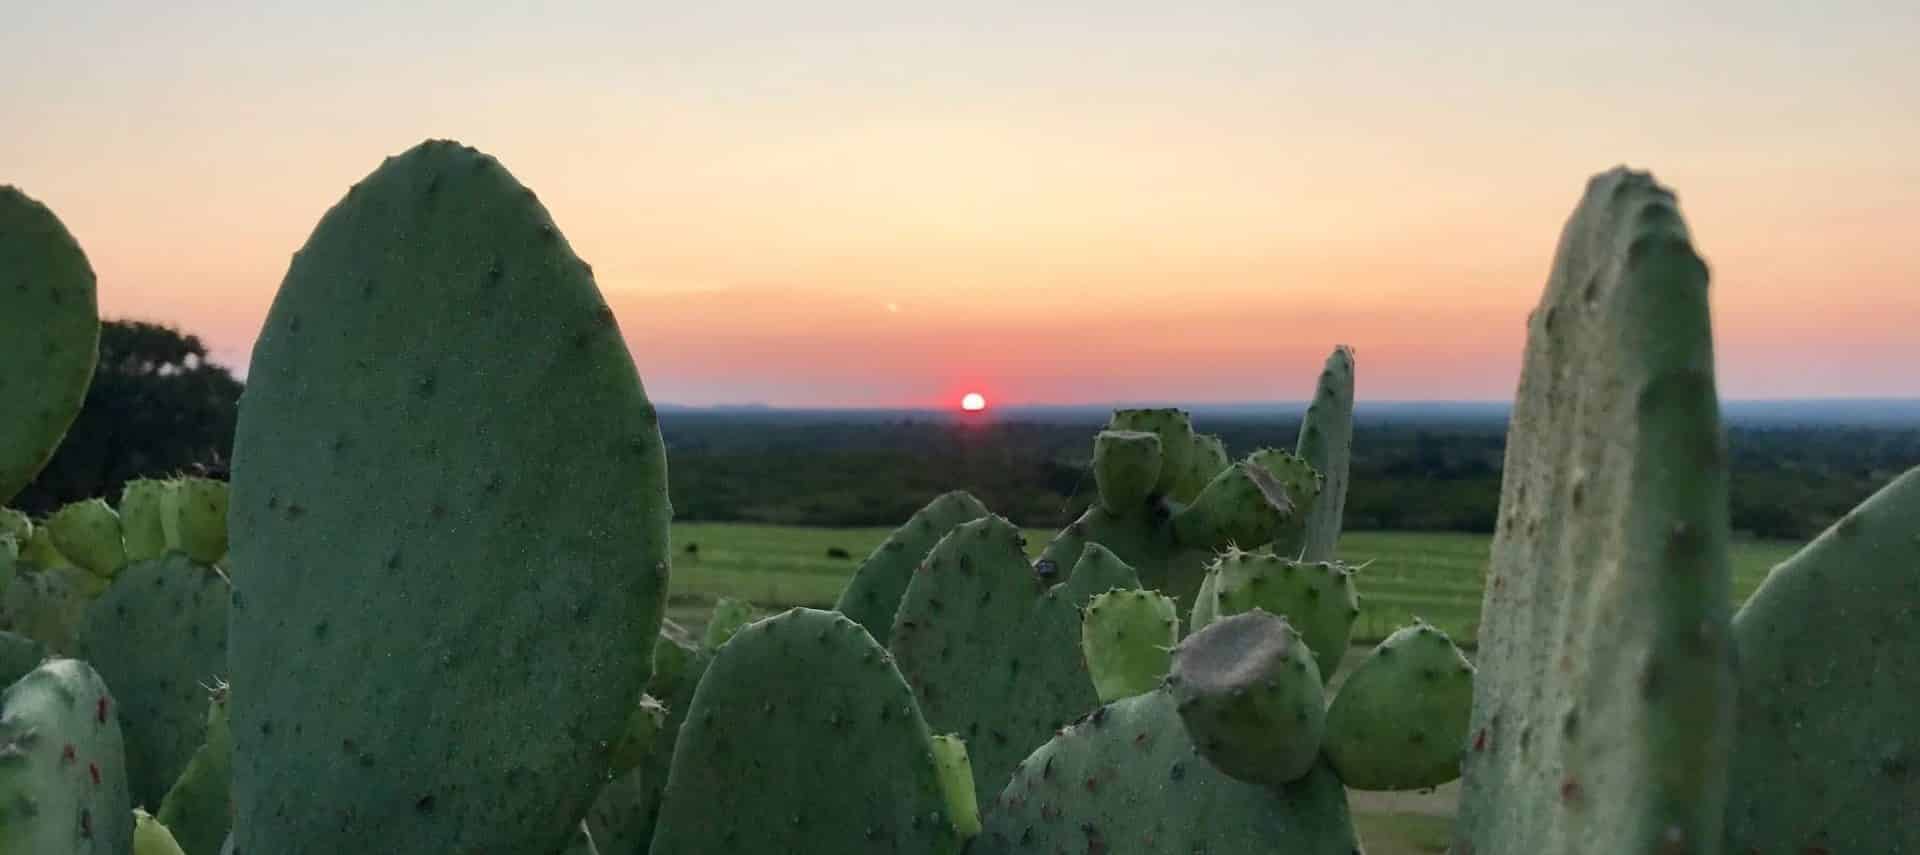 Close up view of cactus with green fields, trees, and setting sun in the background